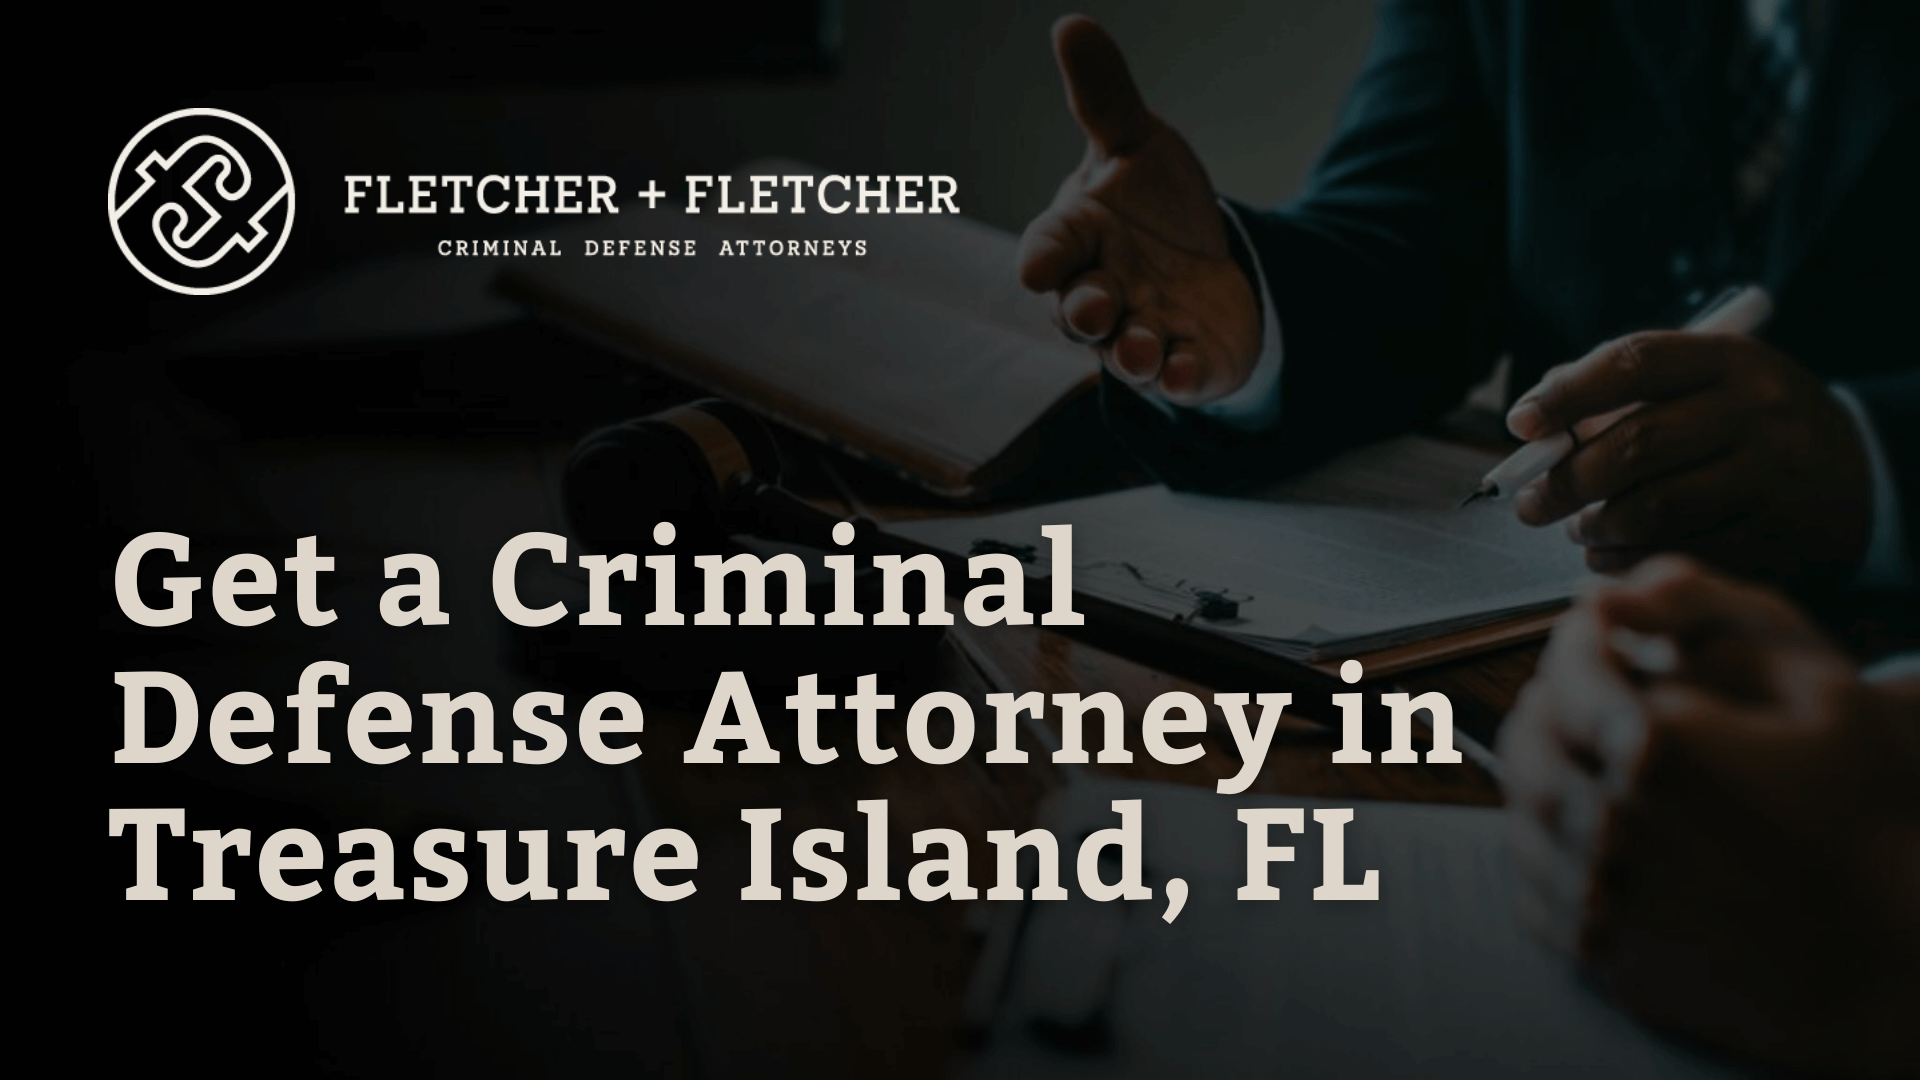 Get a Criminal Defense Attorney in Treasure Island, FL - Fletcher Fletcher Florida criminal defense lawyers